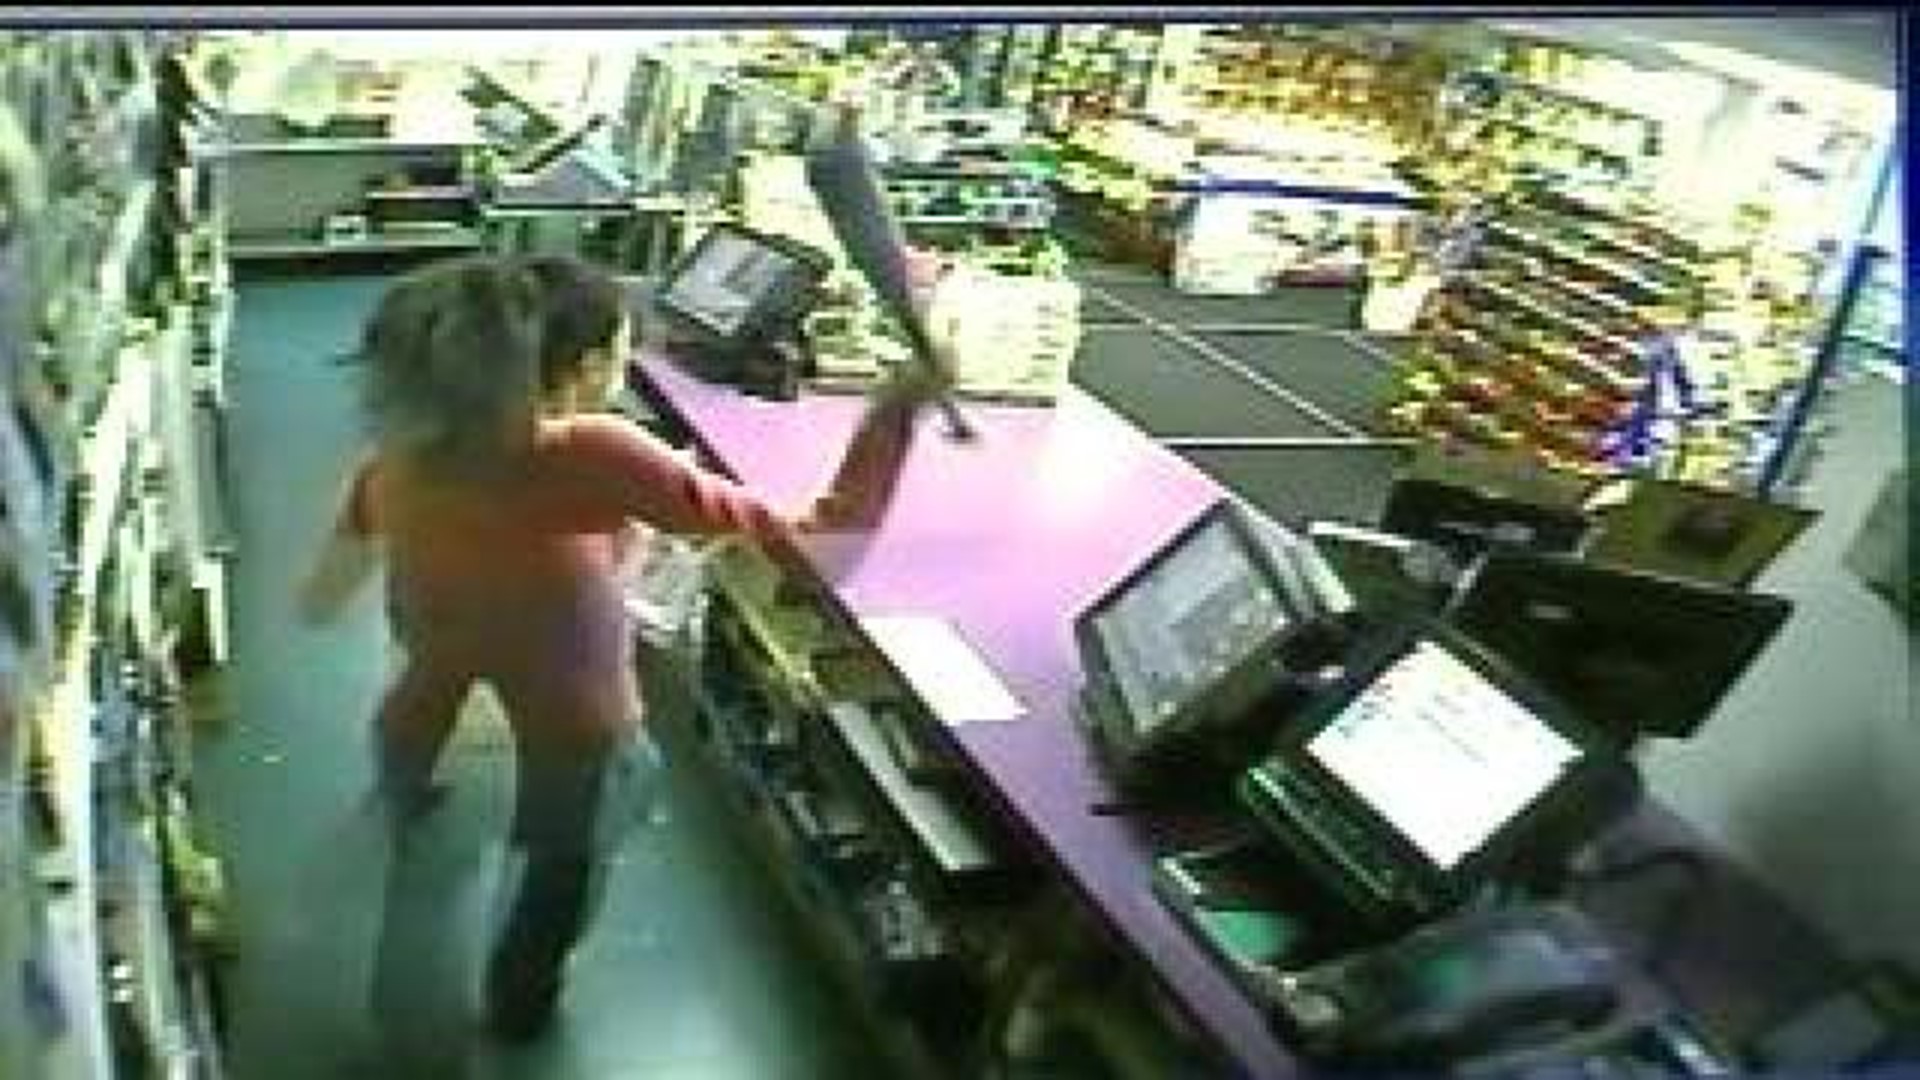 Worker Foils Robbery Attempt With Baseball Bat